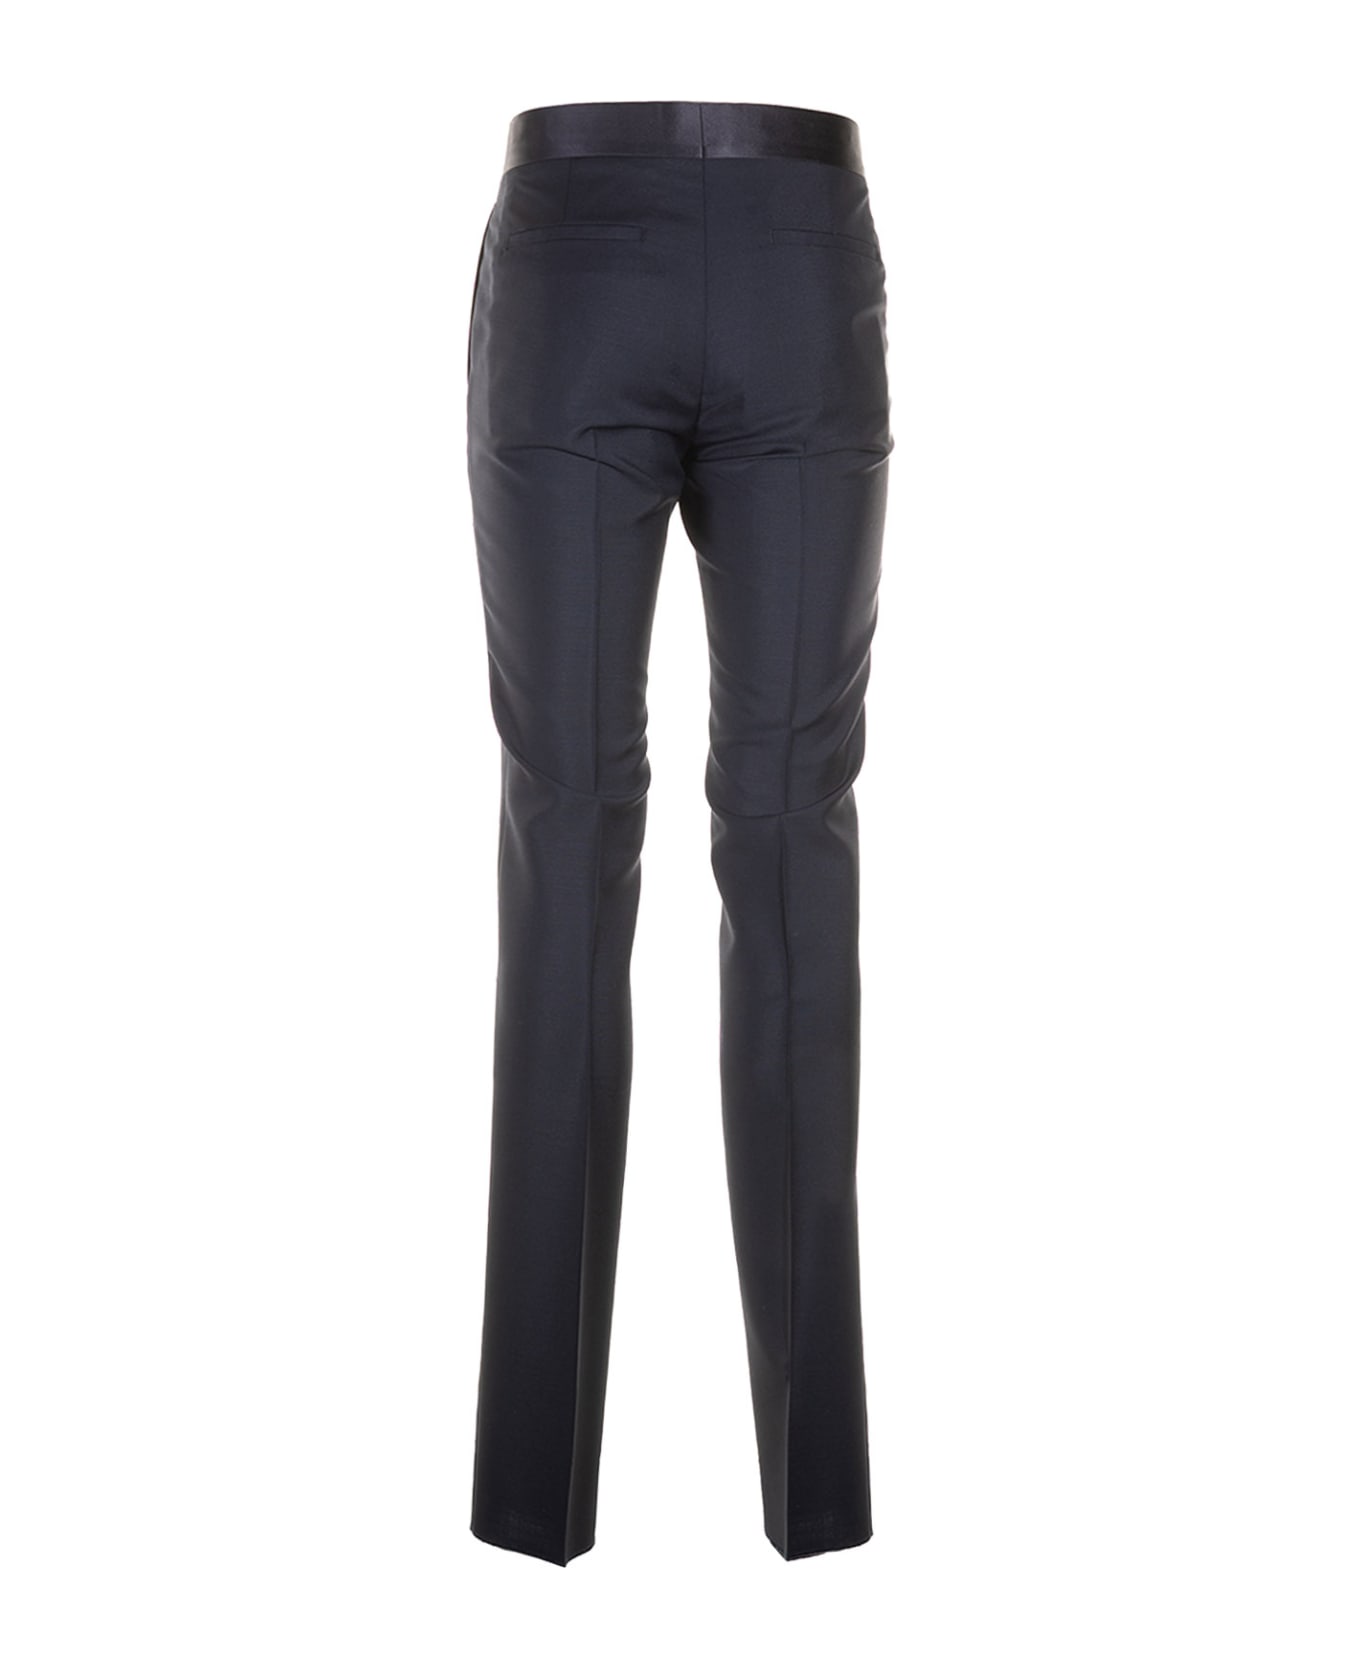 Givenchy Slim Suit Trousers In Wool And Mohair - NIGHT BLU ボトムス